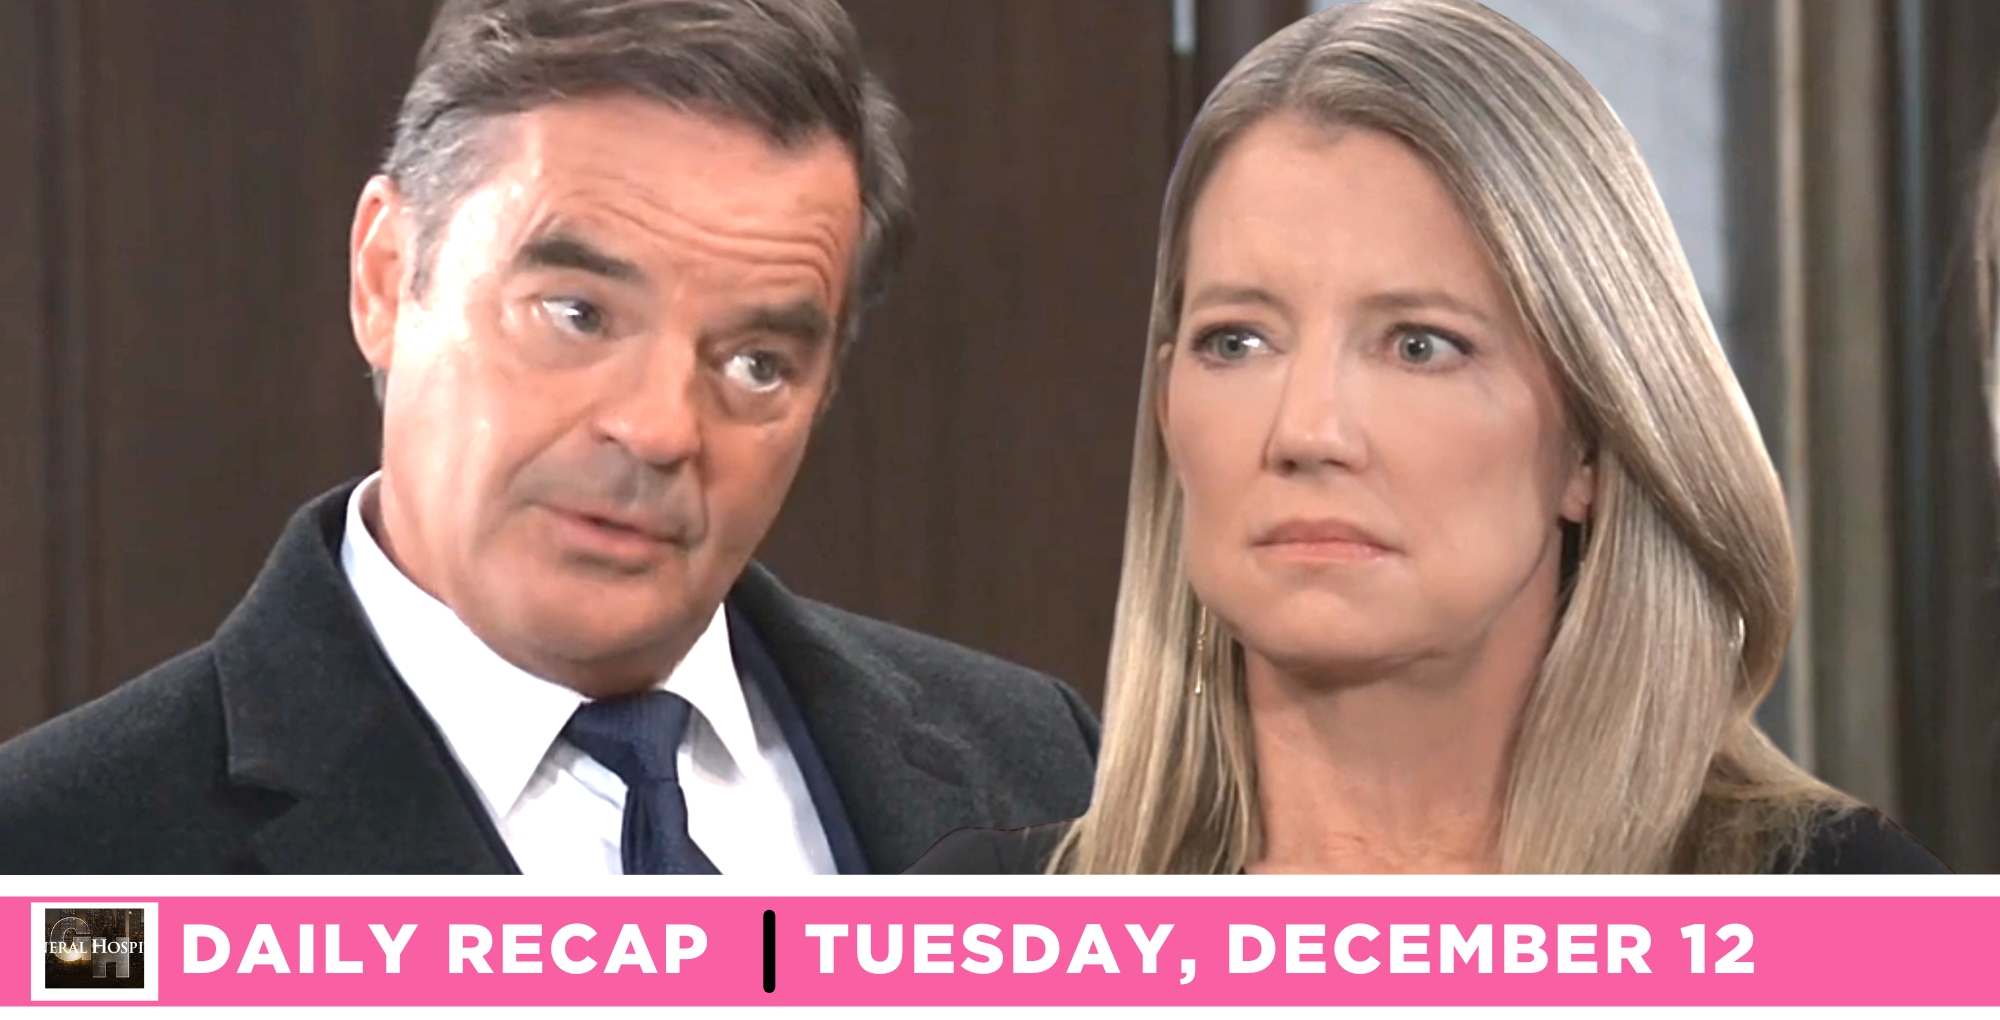 ned quartermaine blackmailed nina reeves corinthos on general hospital recap for tuesday, december 12, 2023.